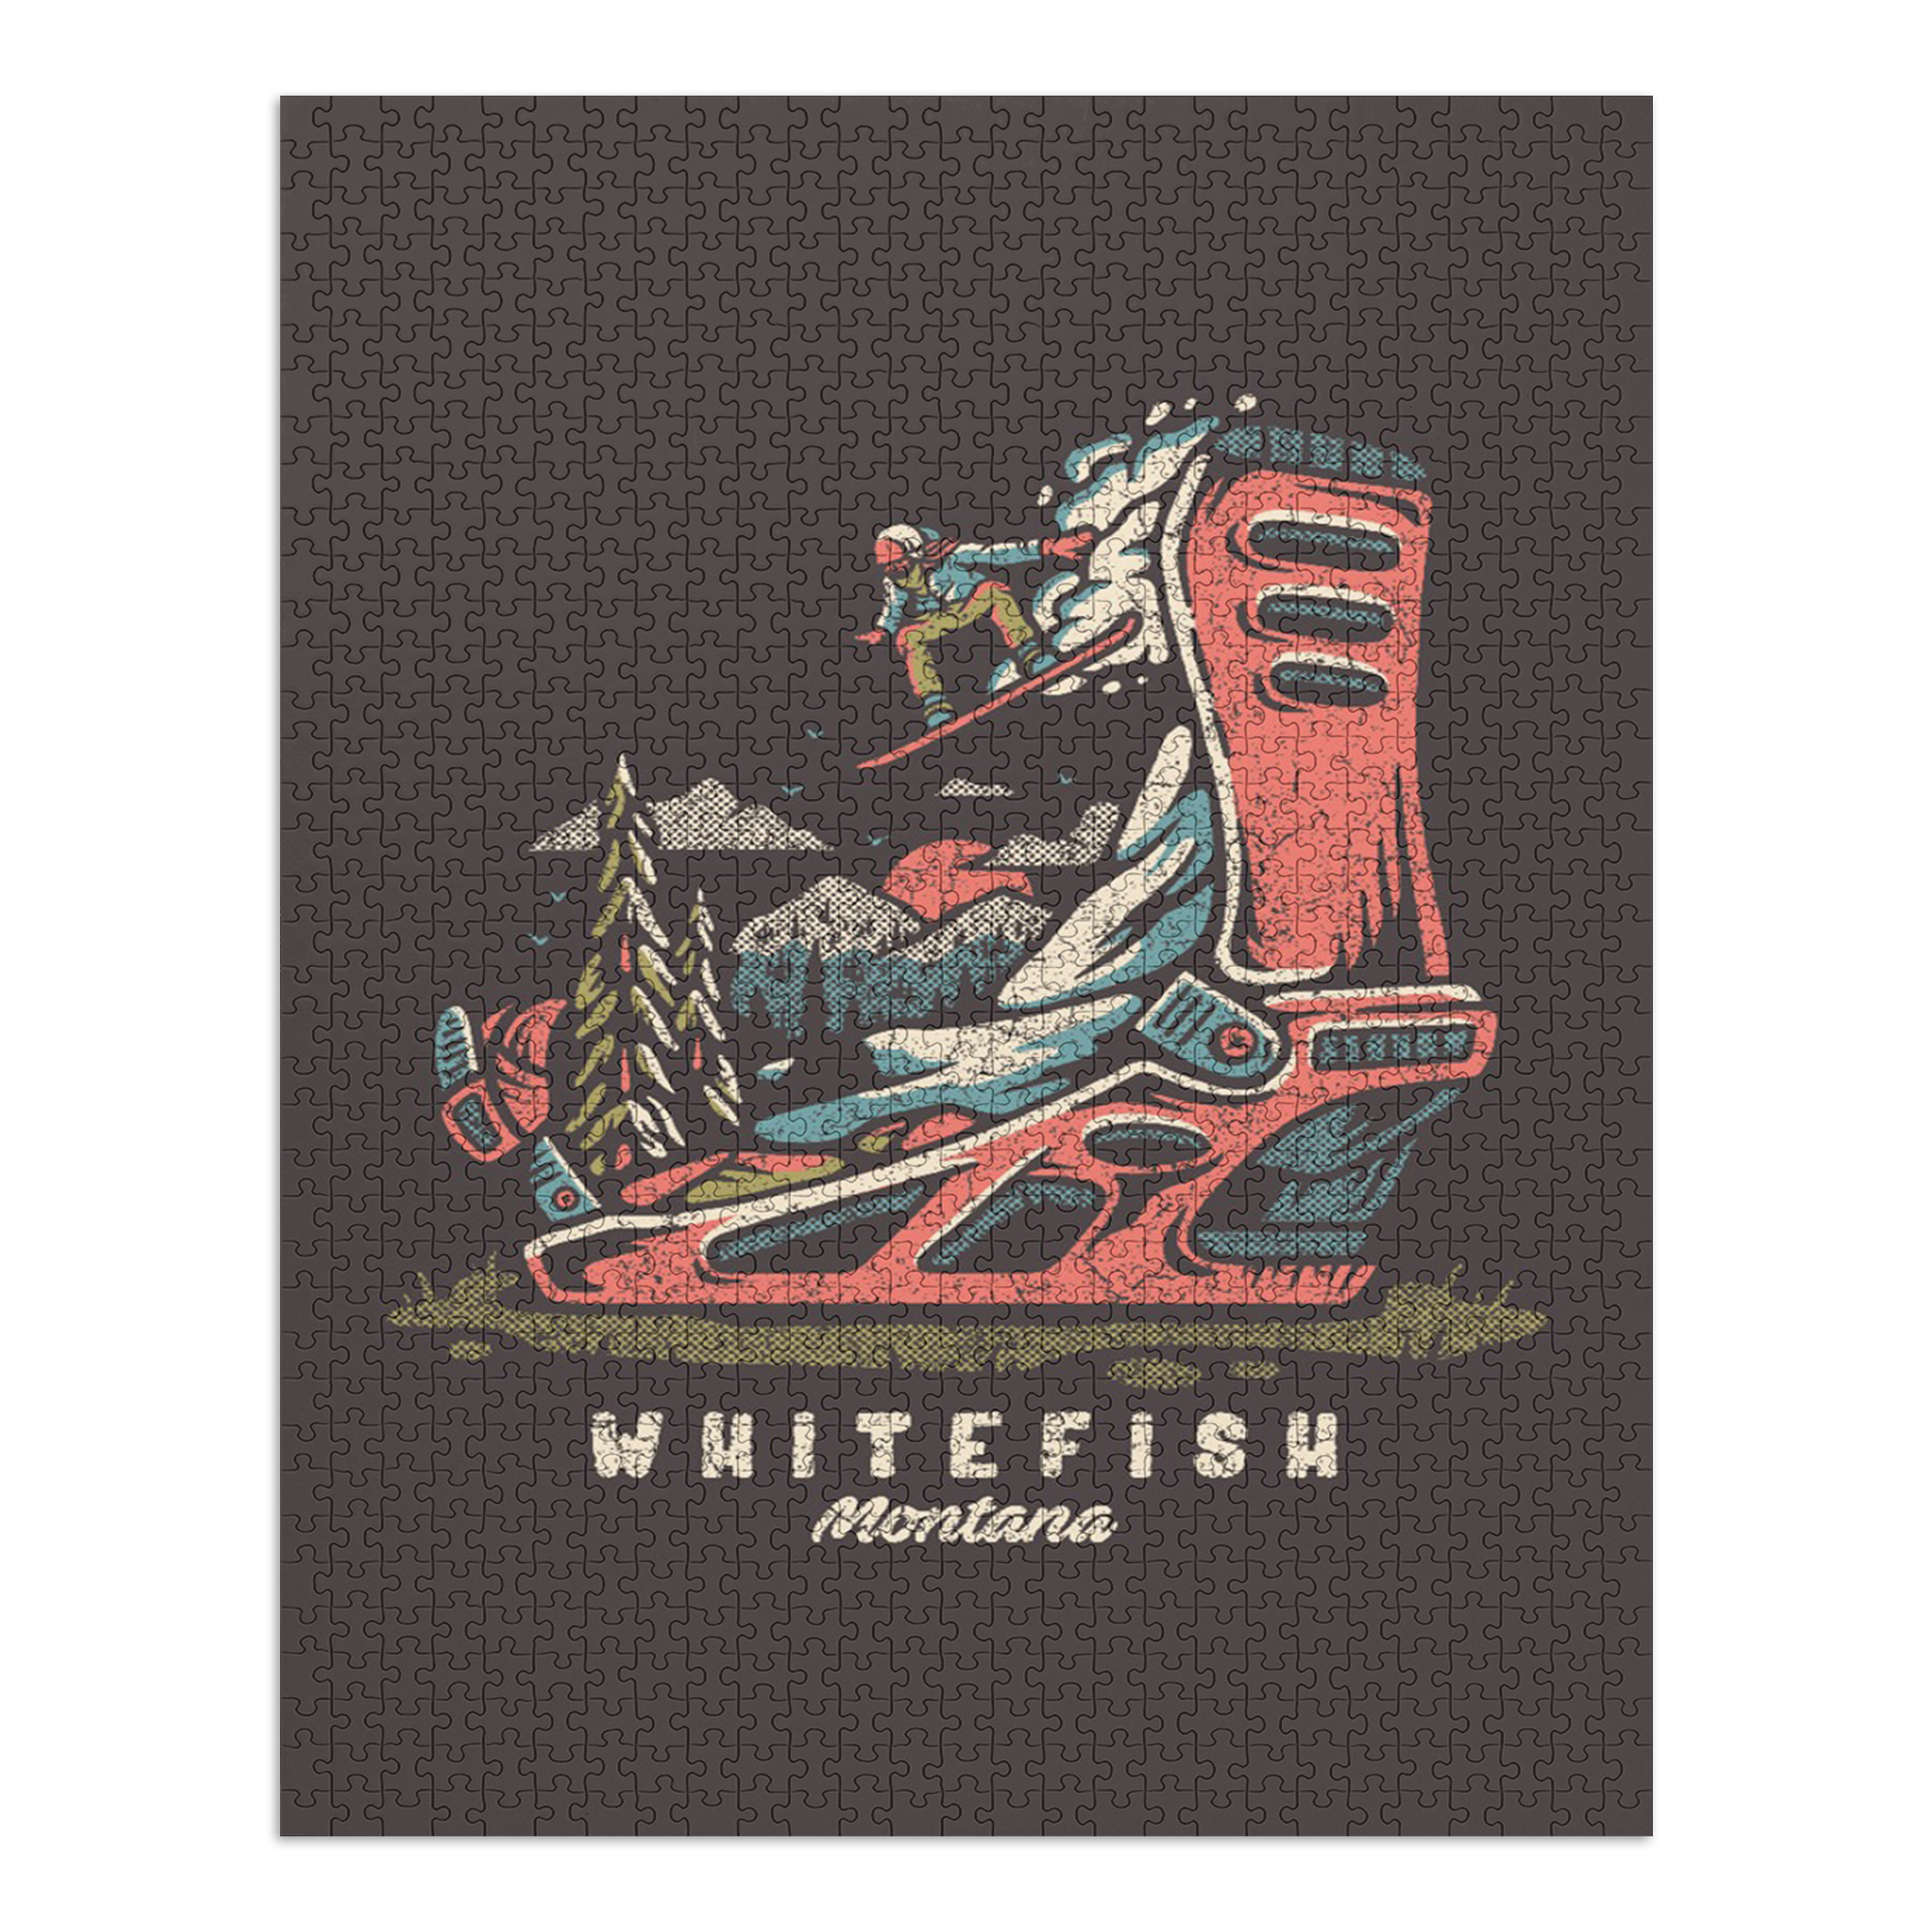 Whitefish, Montana, Snowboard Binding (1000 Piece Puzzle, Size 19x27, Challenging Jigsaw Puzzle for Adults and Family, Made in USA) - image 2 of 4